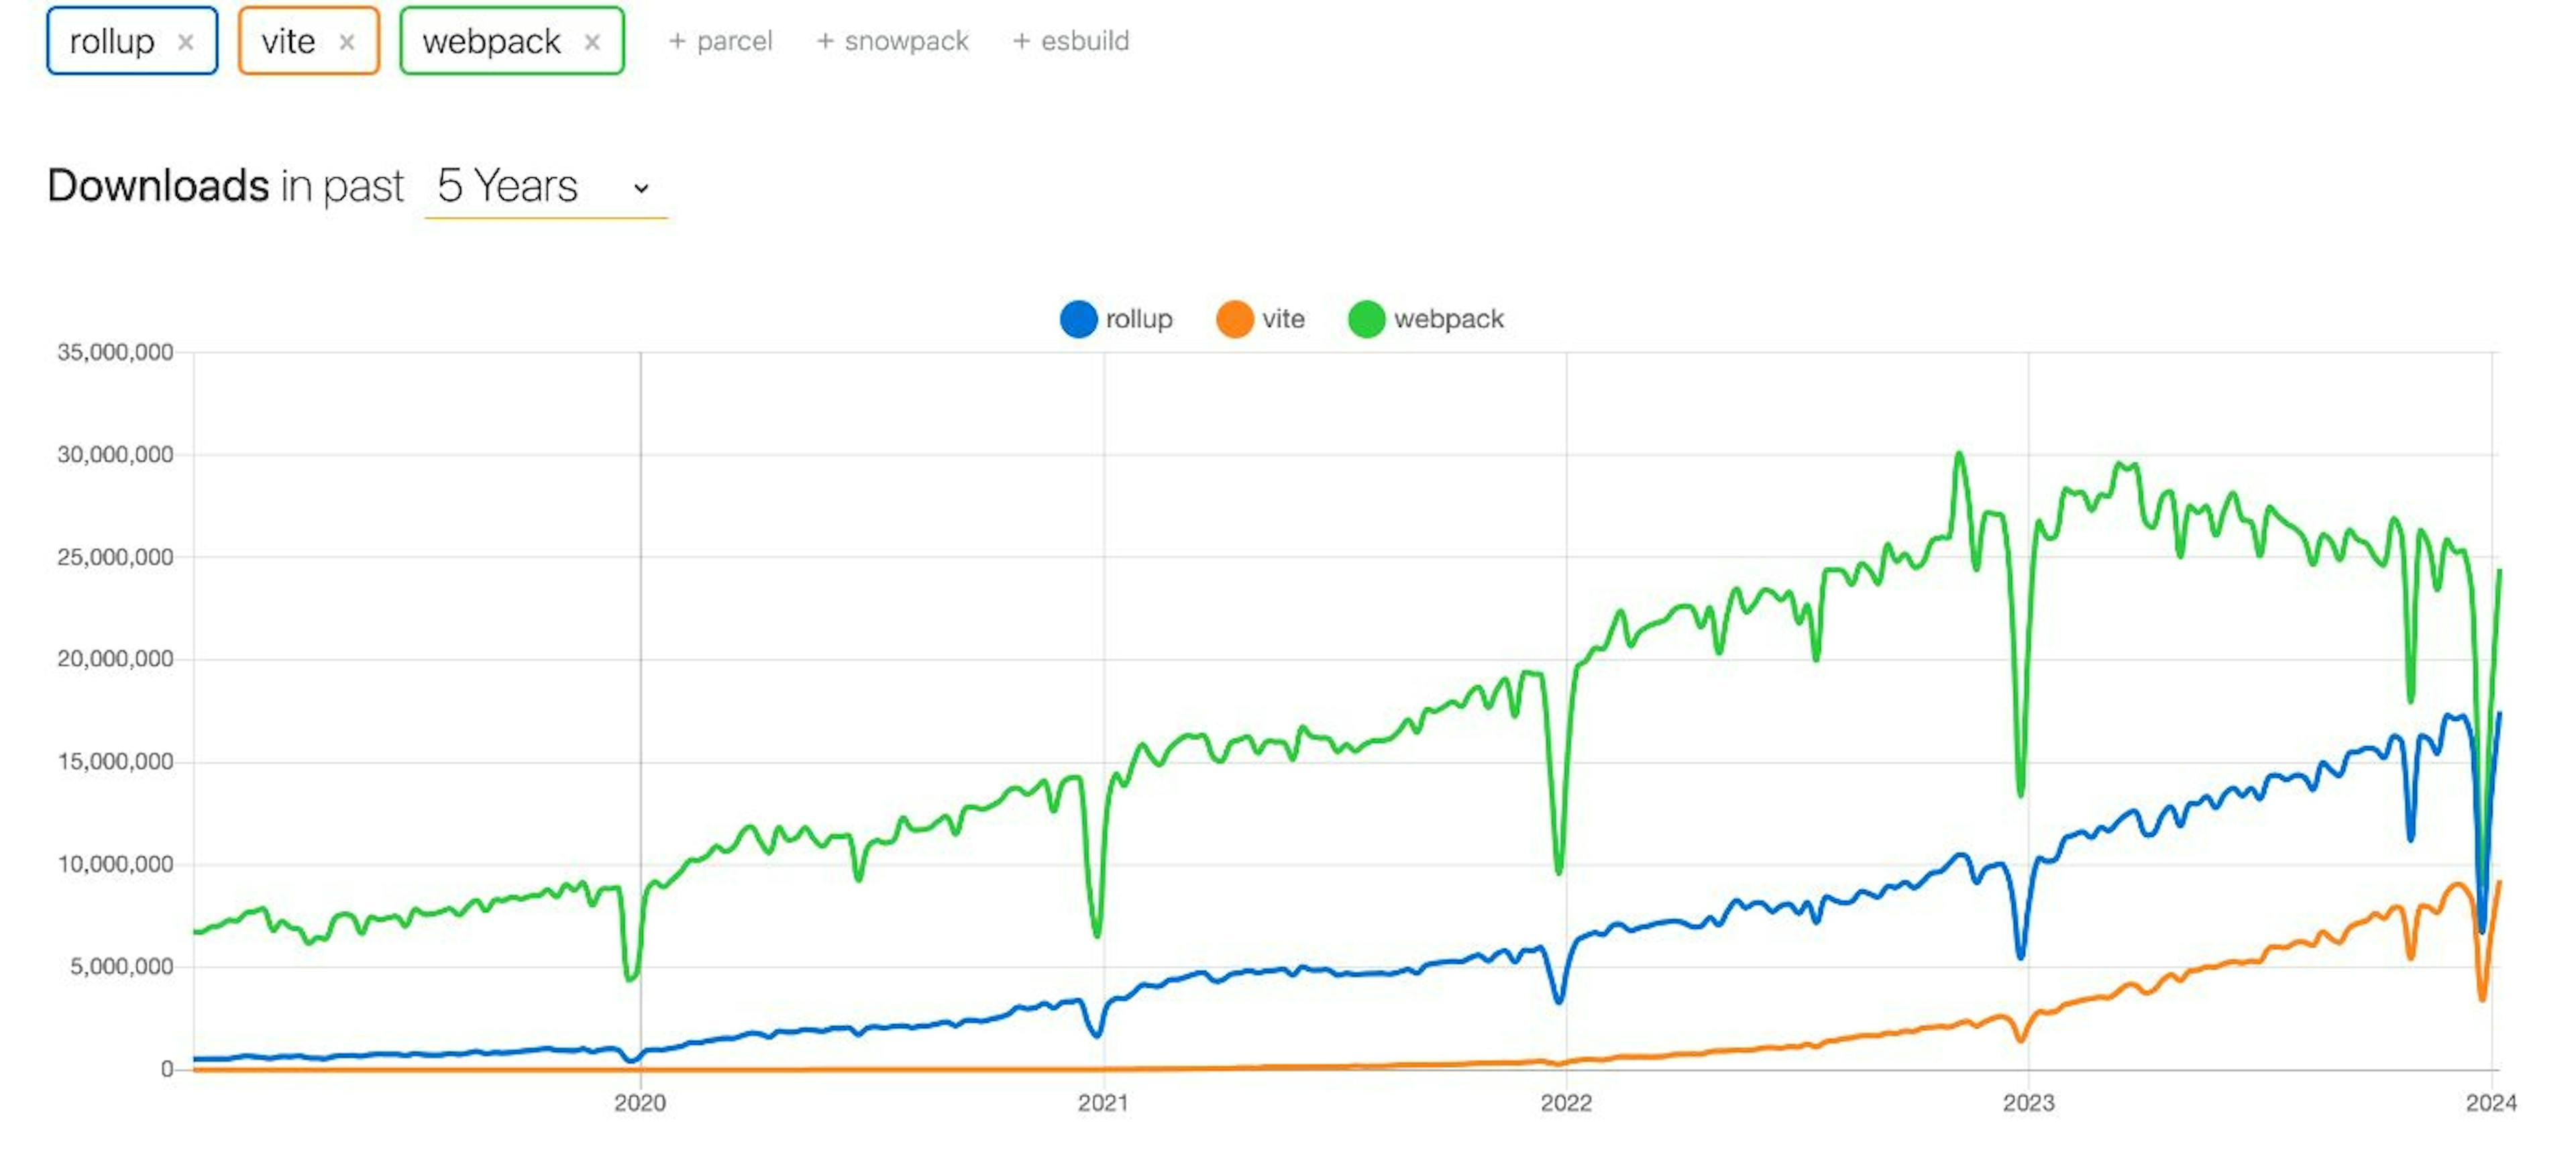 NPM trends over the past 5 years